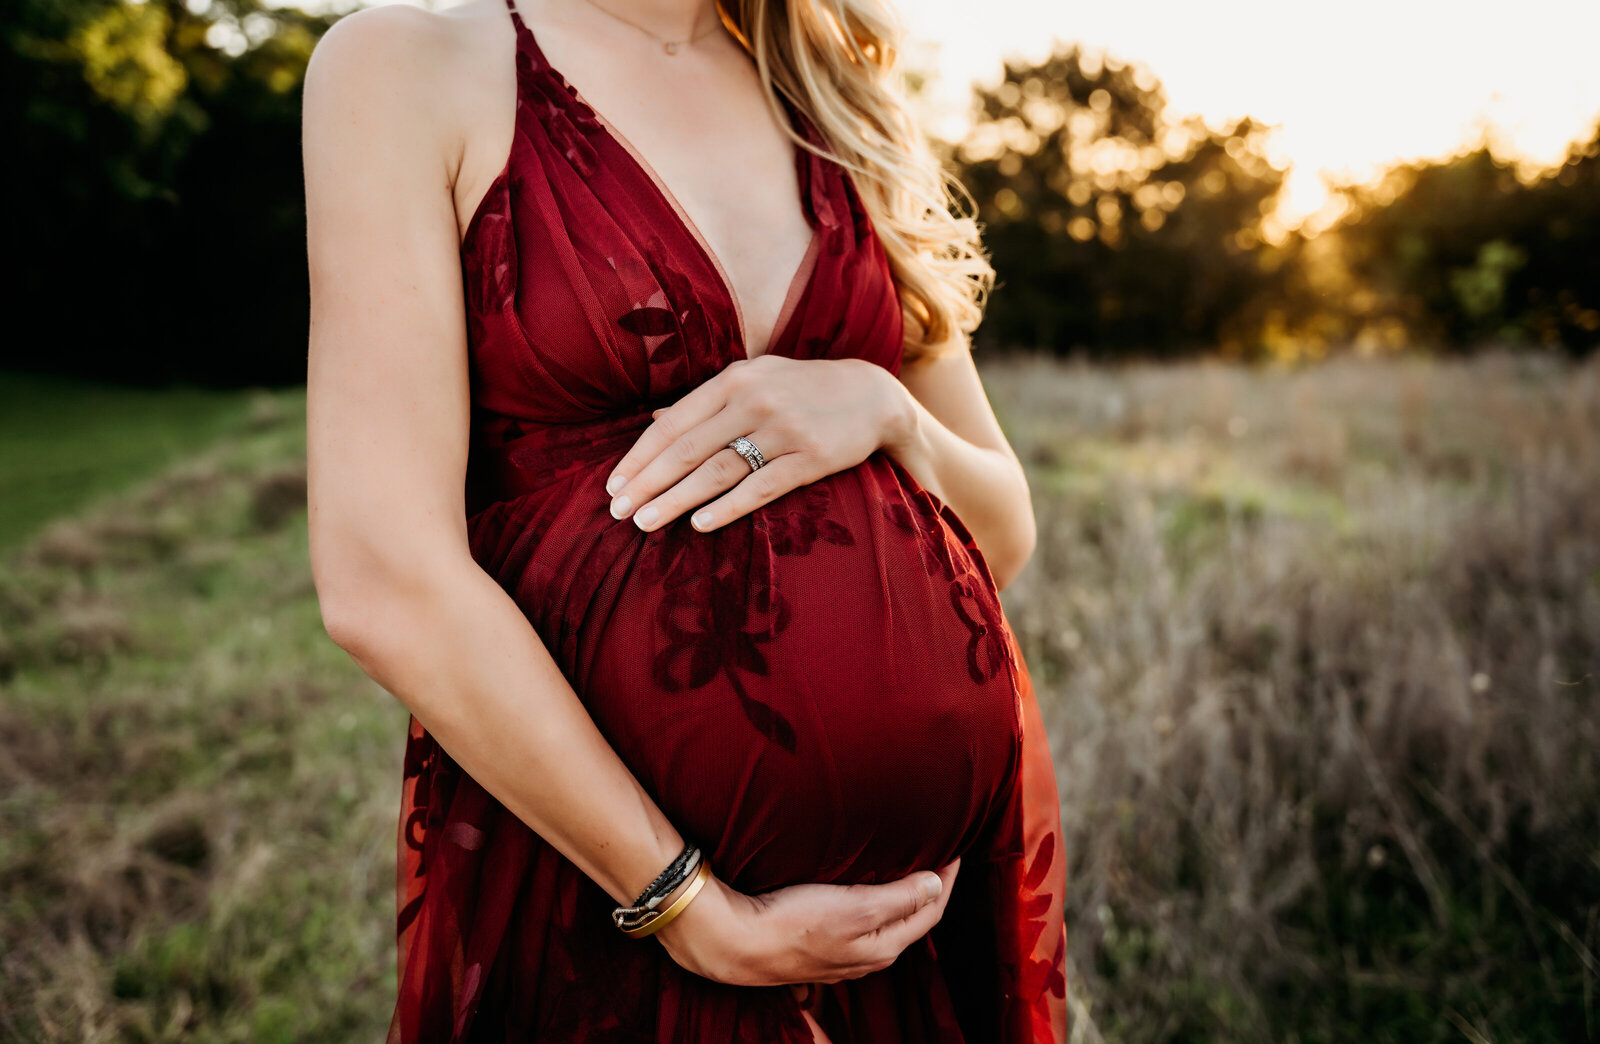 Maternity Photographer, an expectant mother places her hand on her belly to feel baby kick, she is outside